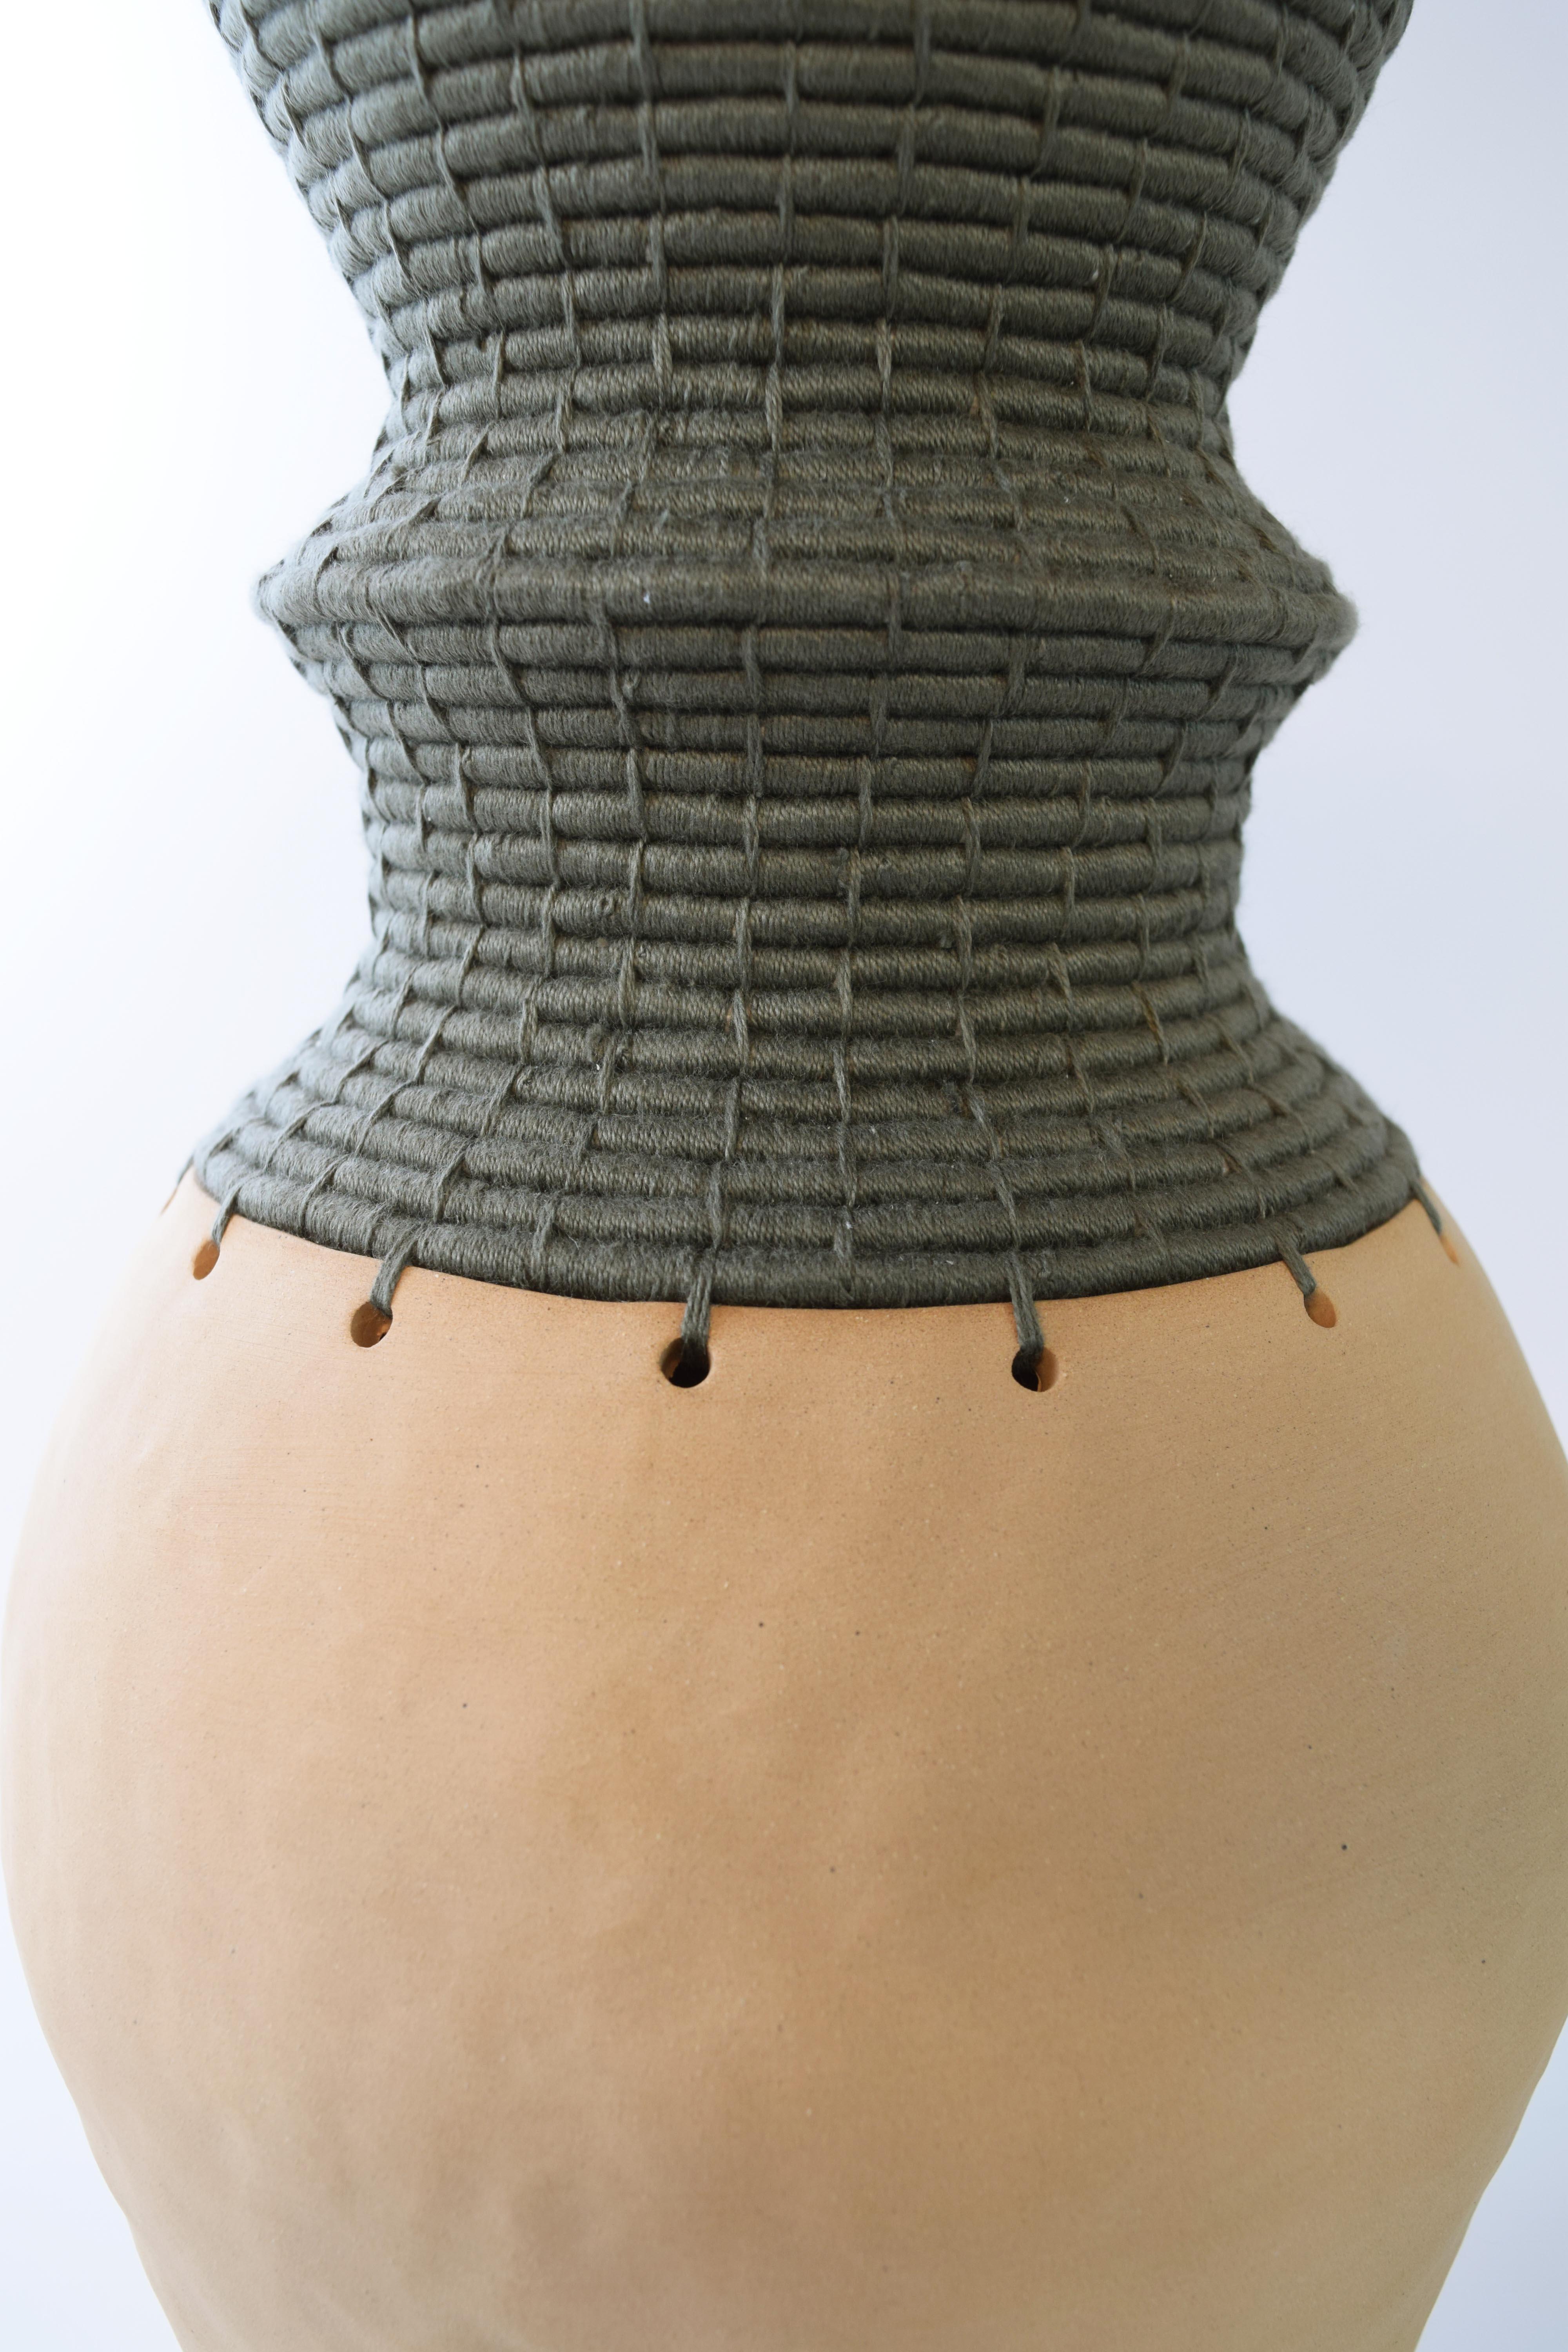 Hand-Crafted One of a Kind Ceramic Vessel #773, Unglazed Stoneware w. Olive Woven Cotton